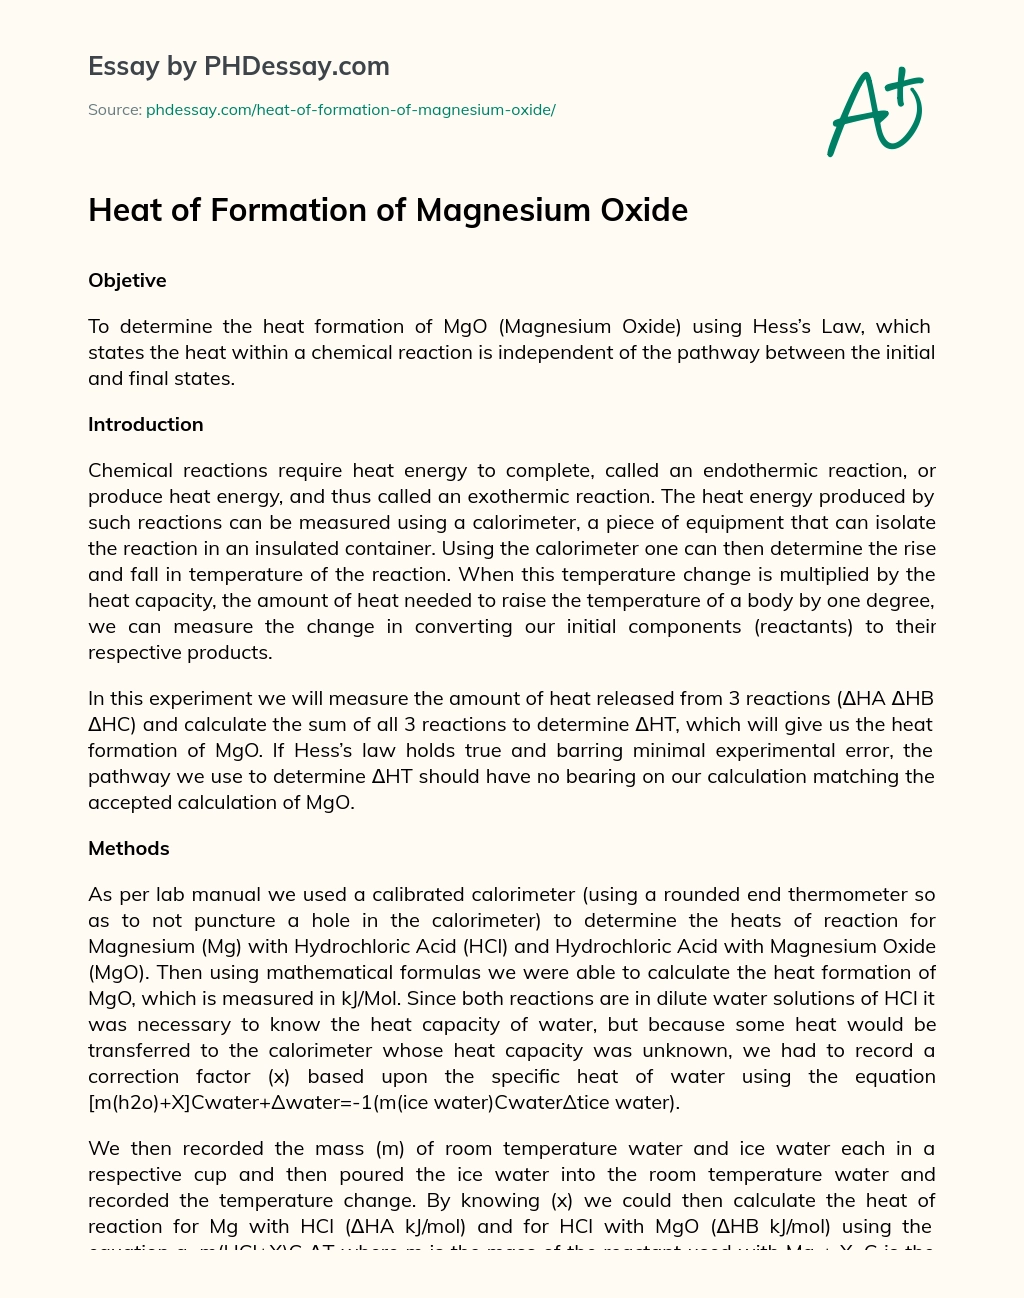 Heat of Formation of Magnesium Oxide essay